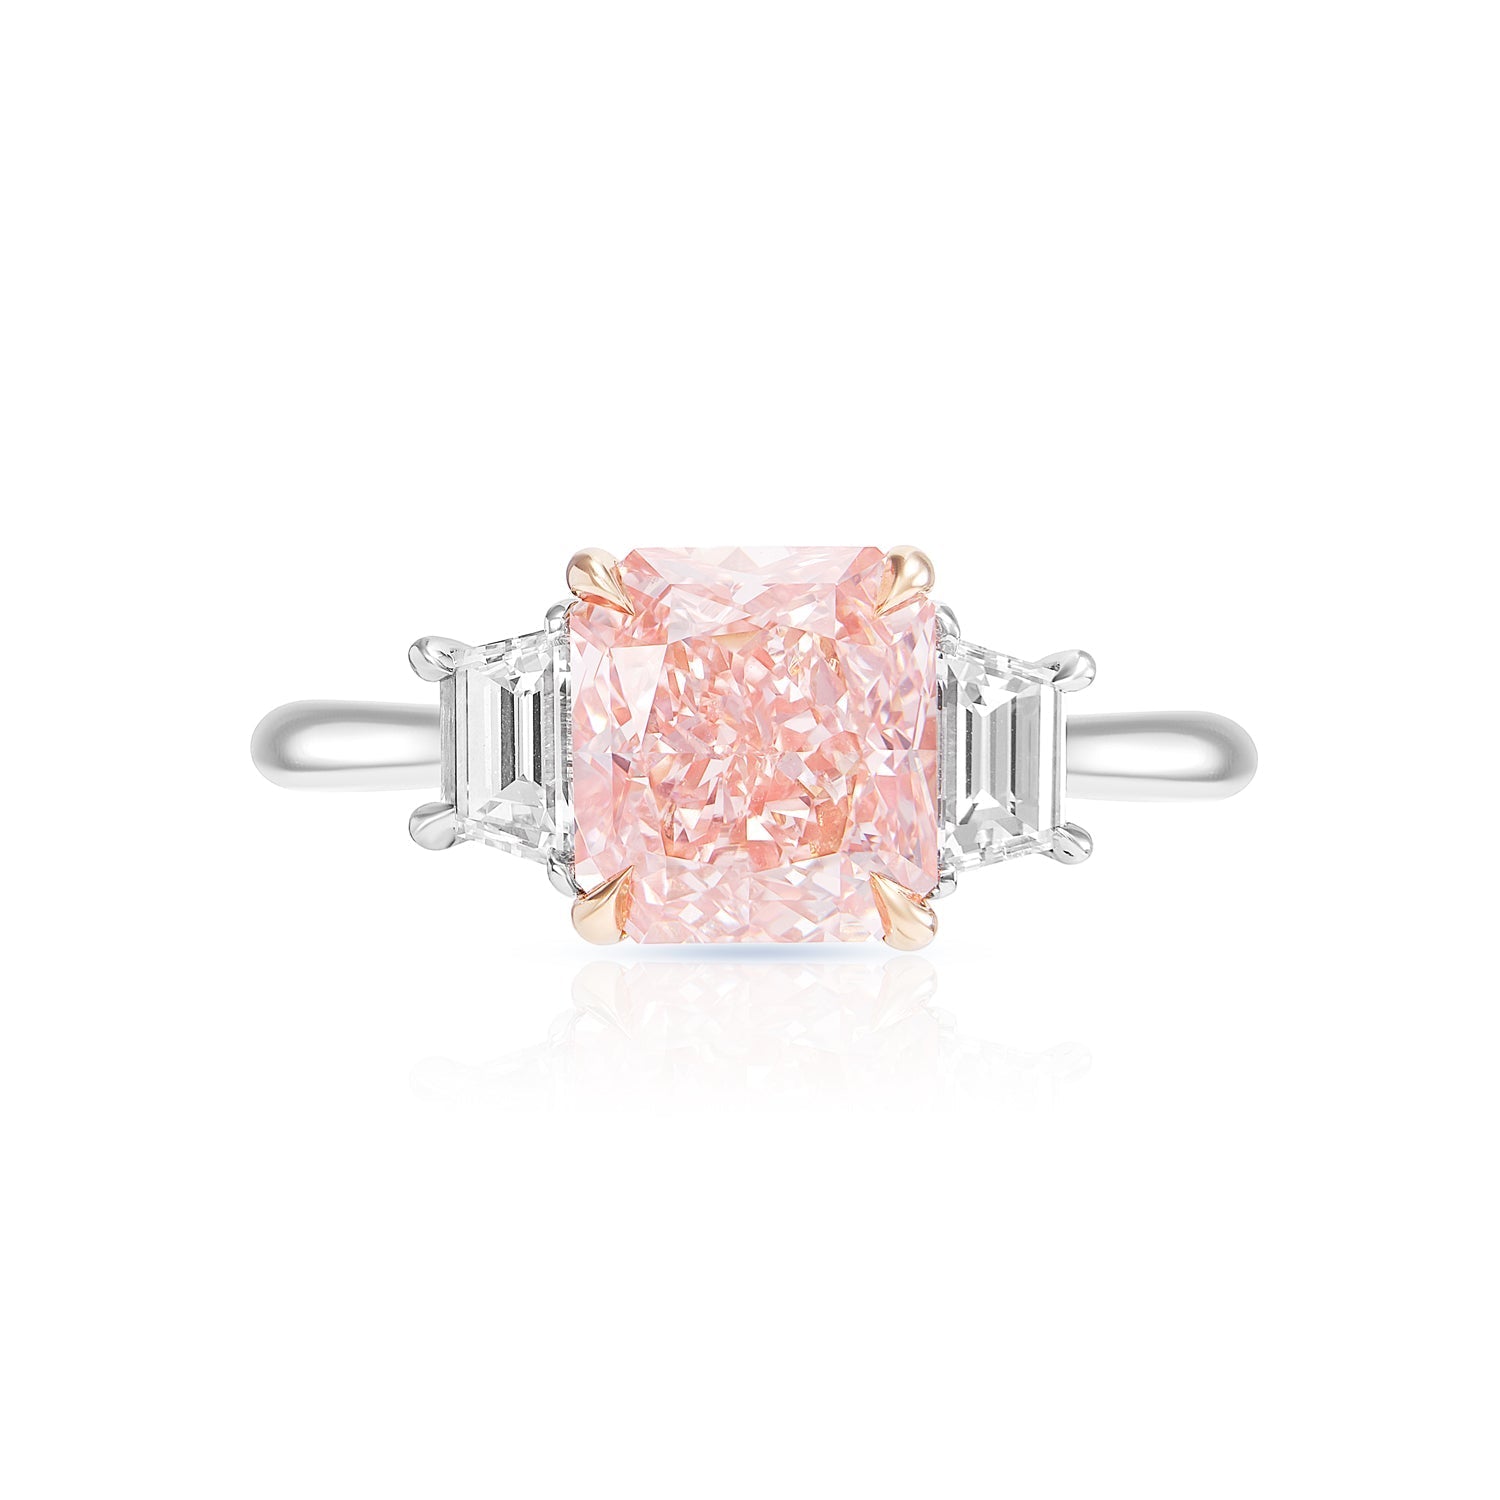 Alaia 3 Carats Cushion Cut Earth Mined Fancy Vivid Pink Diamond Engagement Ring in Platinum. Front View